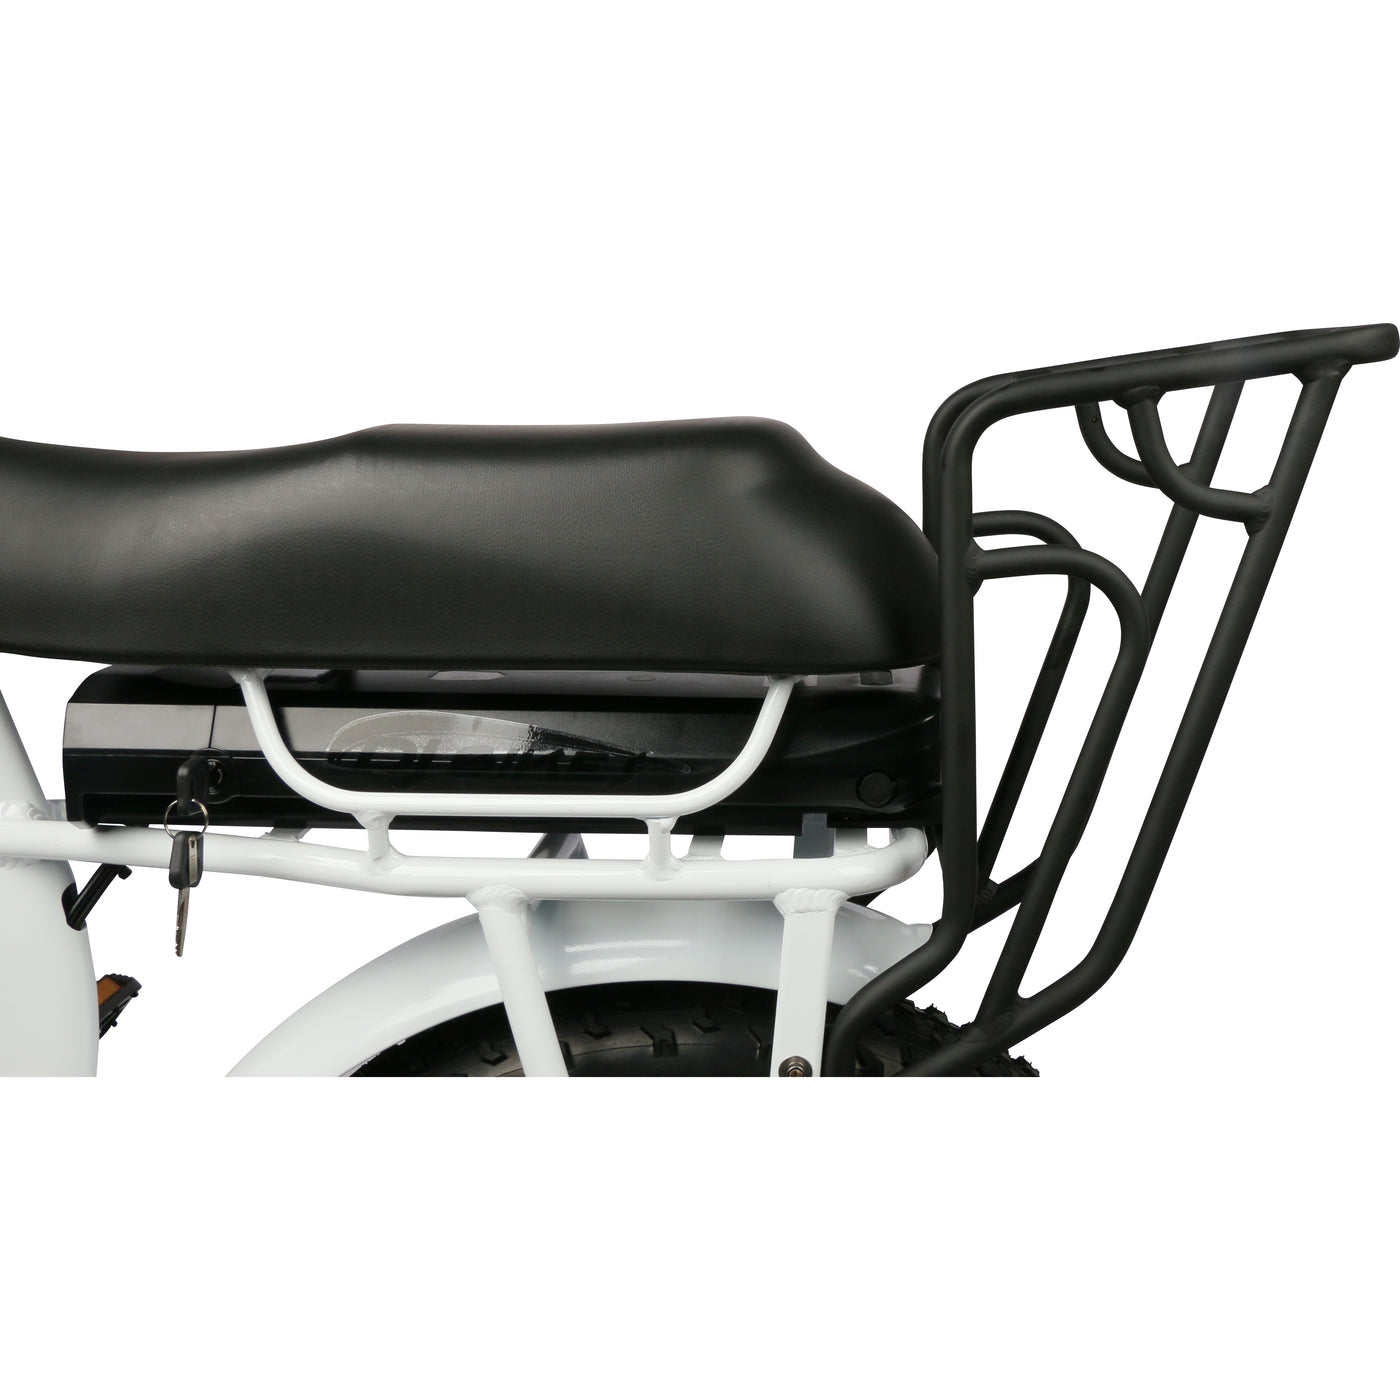 Redesigned DJ Super Bike Step Thru from DJ Bikes Canada now sports a rear rack for your gear